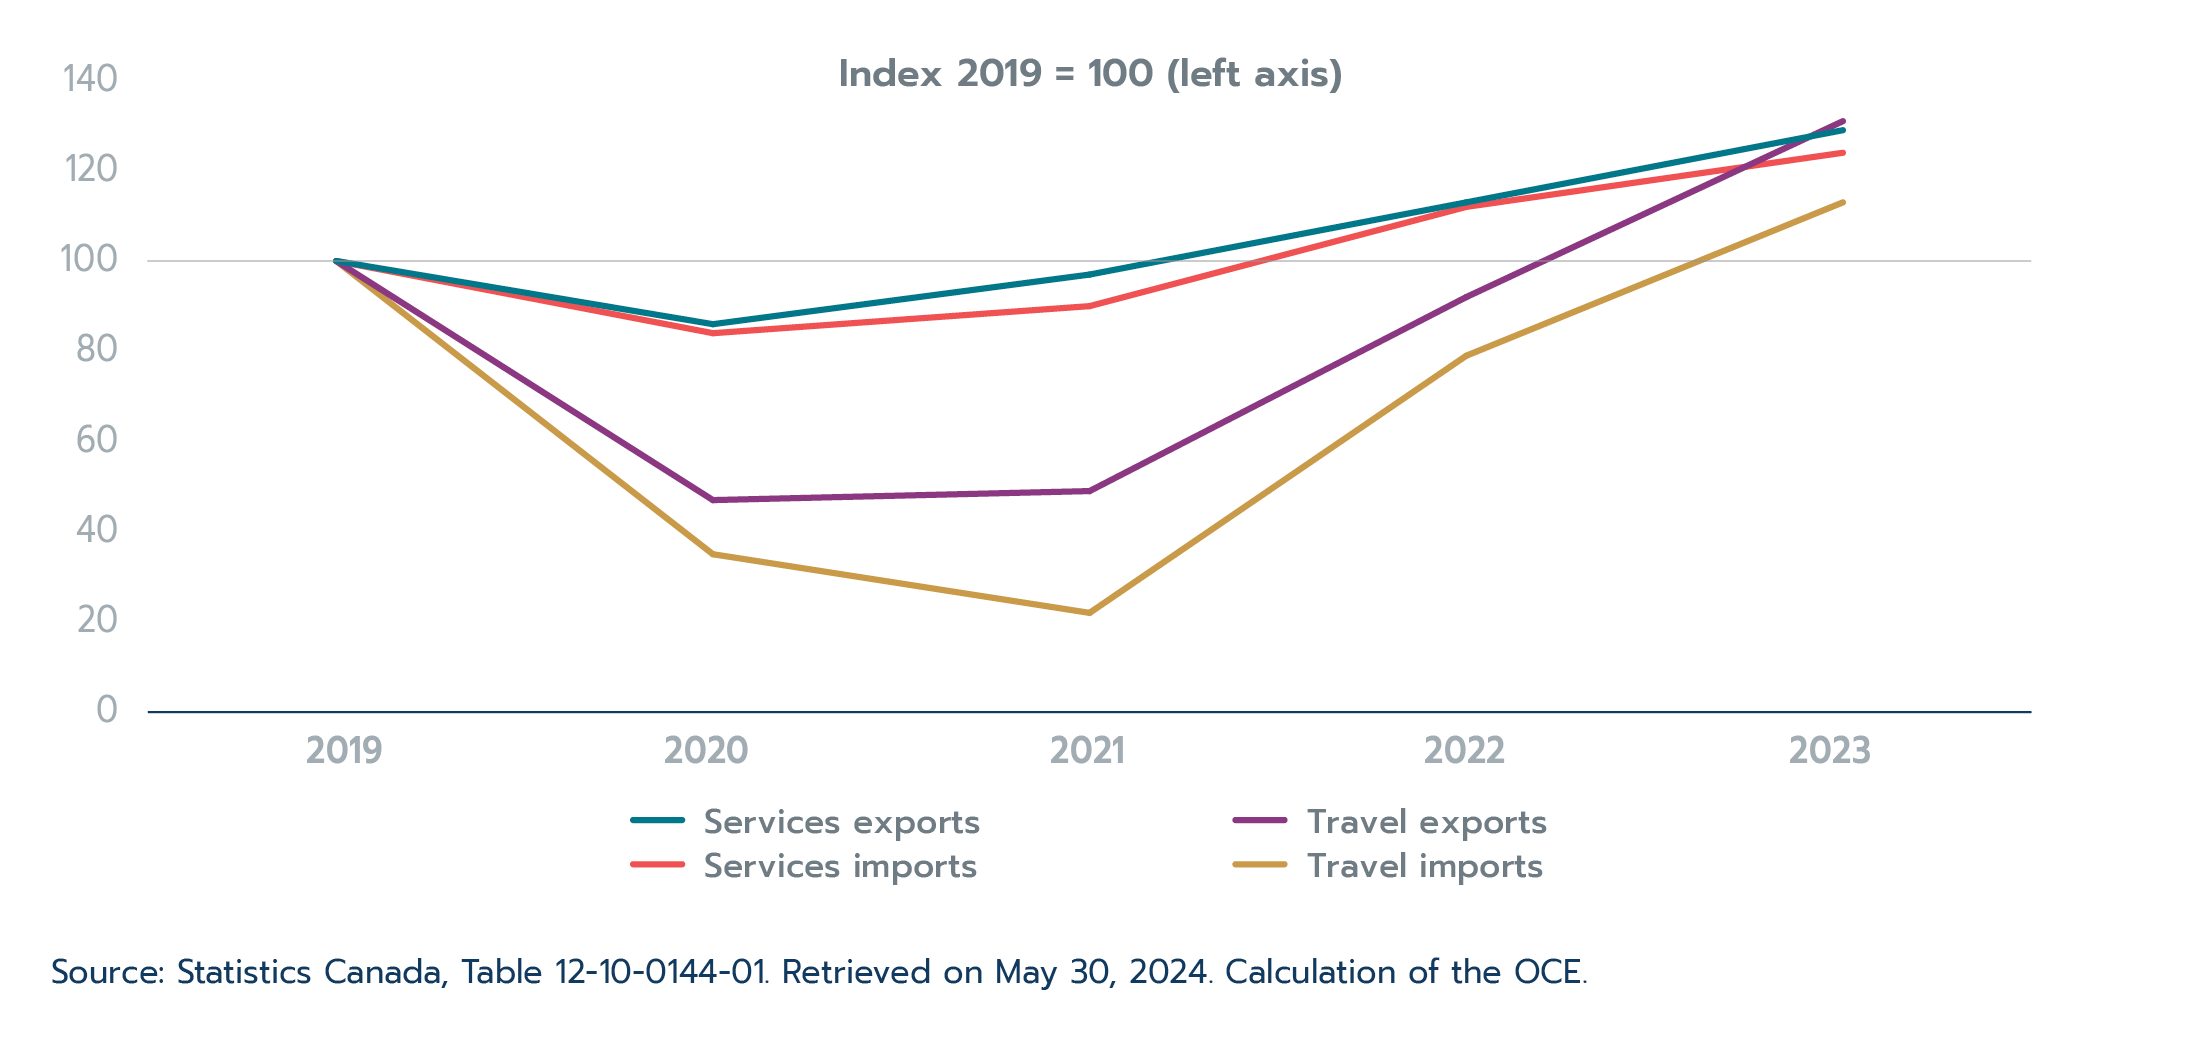 Figure 1.11: Travel services trade surpasses pre-pandemic levels for the first time since the start of the COVID-19 pandemic